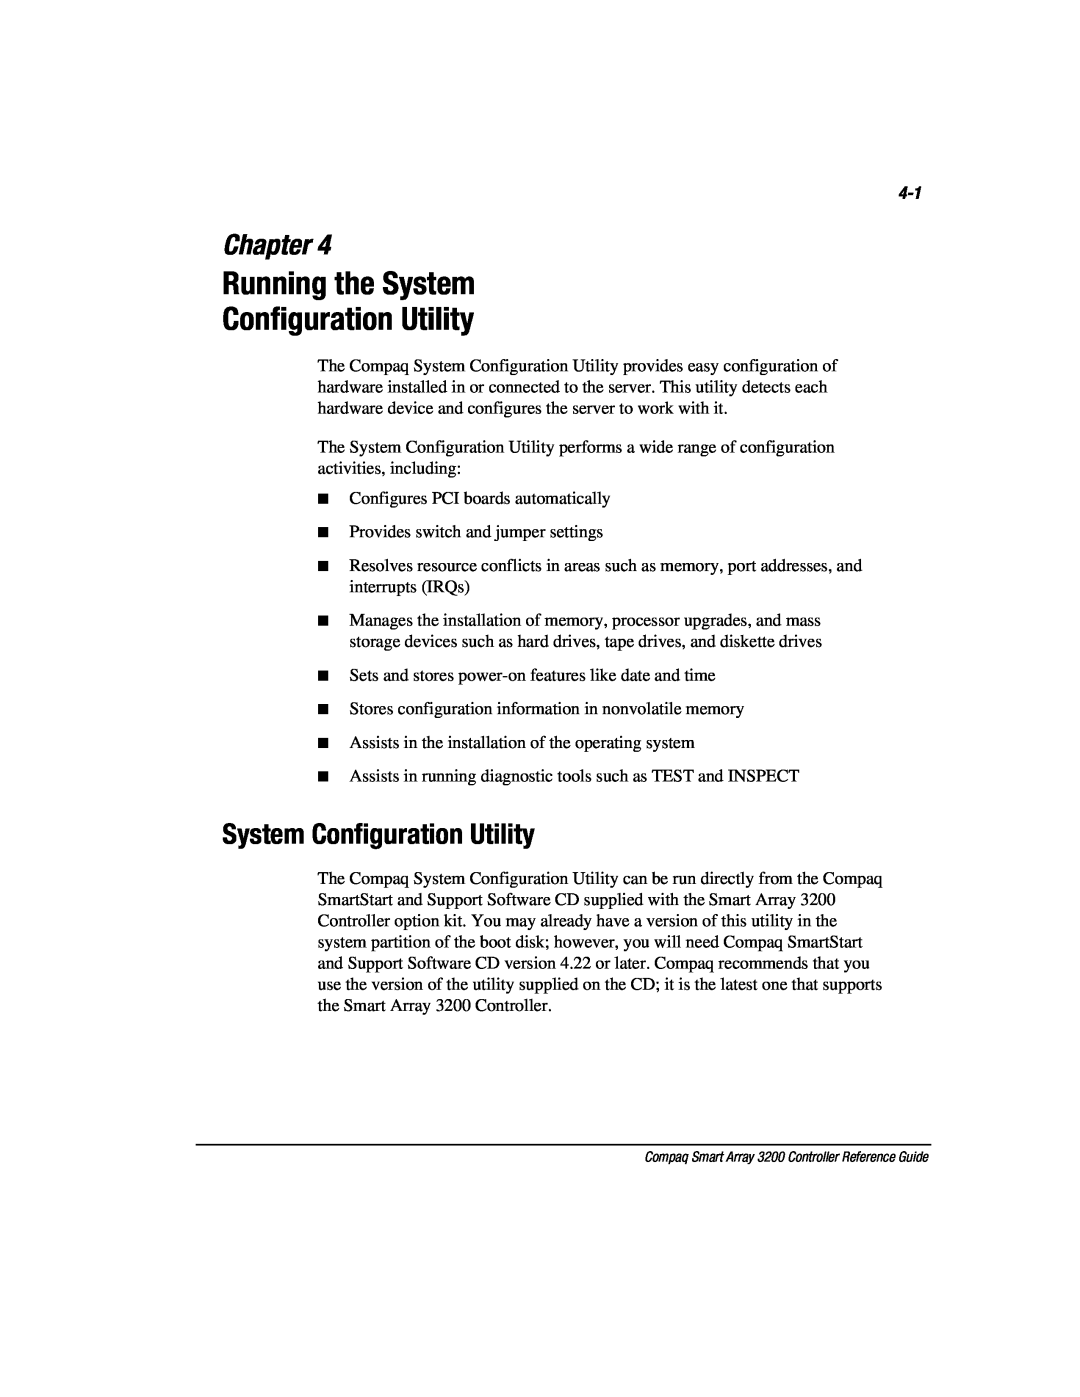 Compaq 3200 manual Running the System Configuration Utility, Chapter 